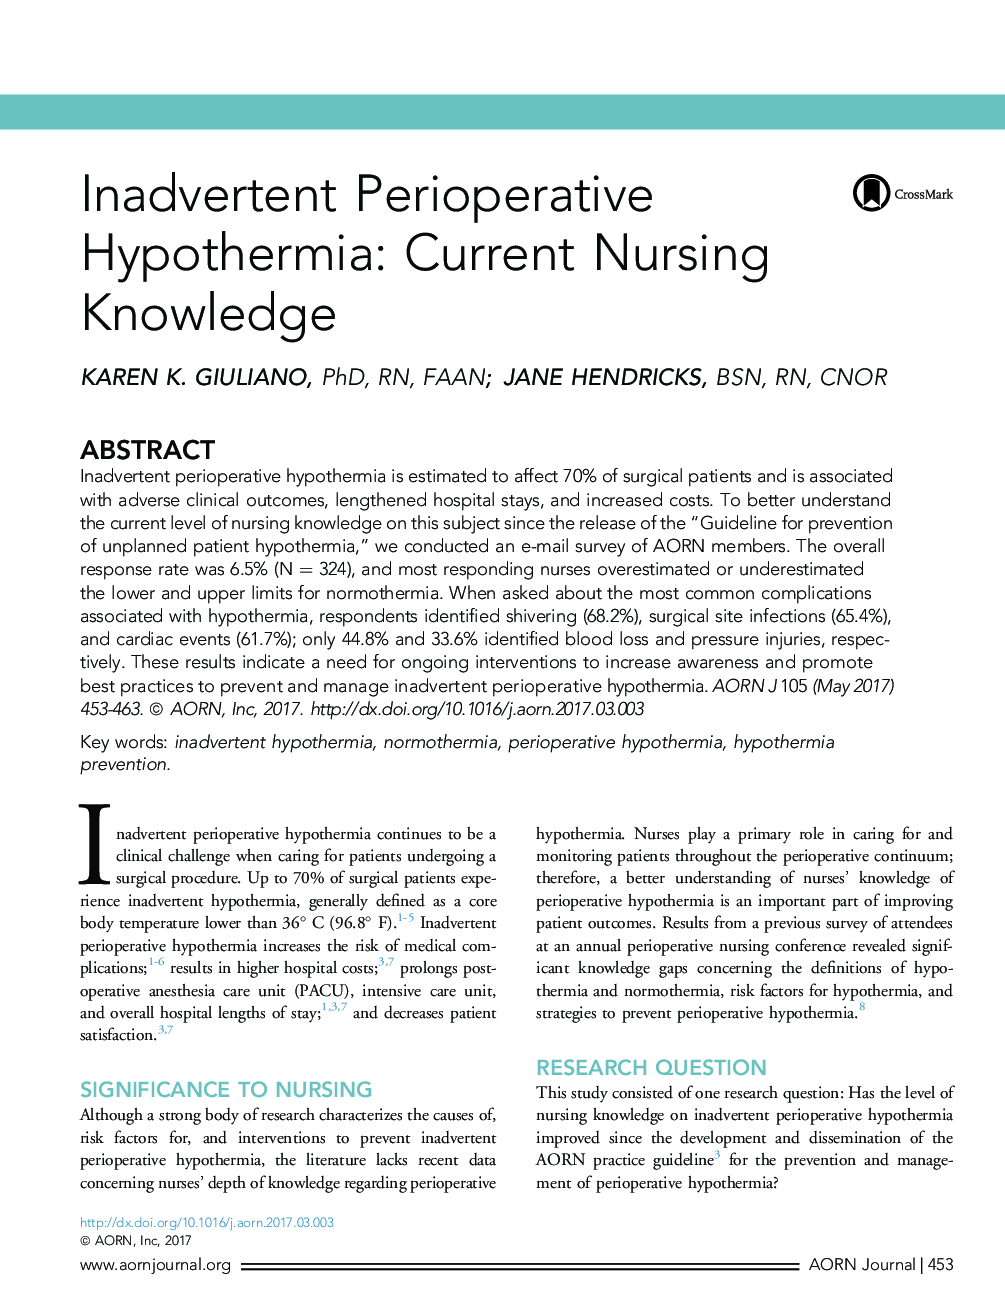 Inadvertent Perioperative Hypothermia: Current Nursing Knowledge